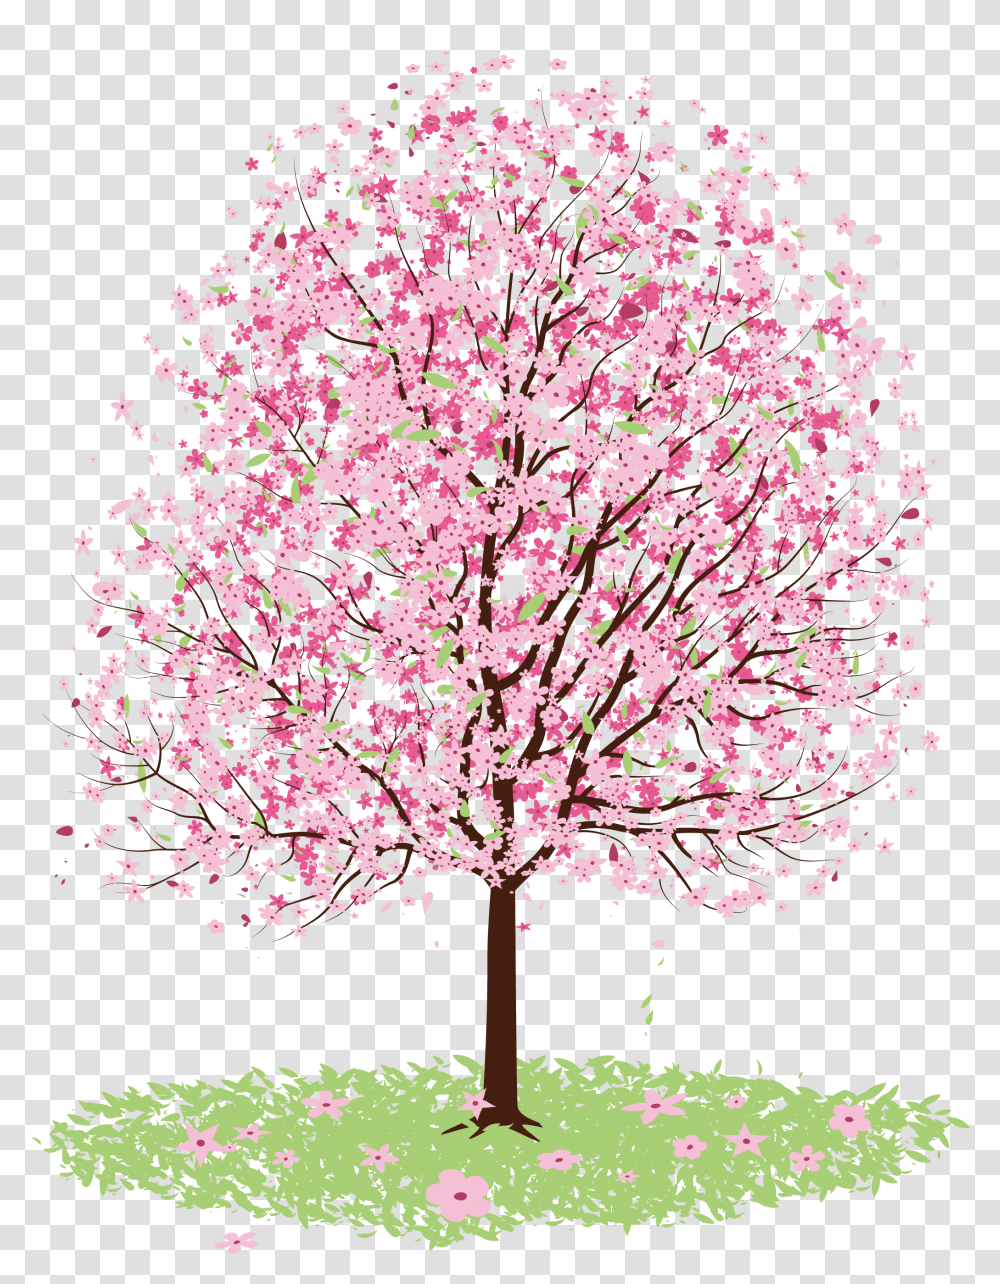 Cherry Blossom Drawing Tree Vector Cherry Blossom Tree, Plant, Flower, Petal Transparent Png